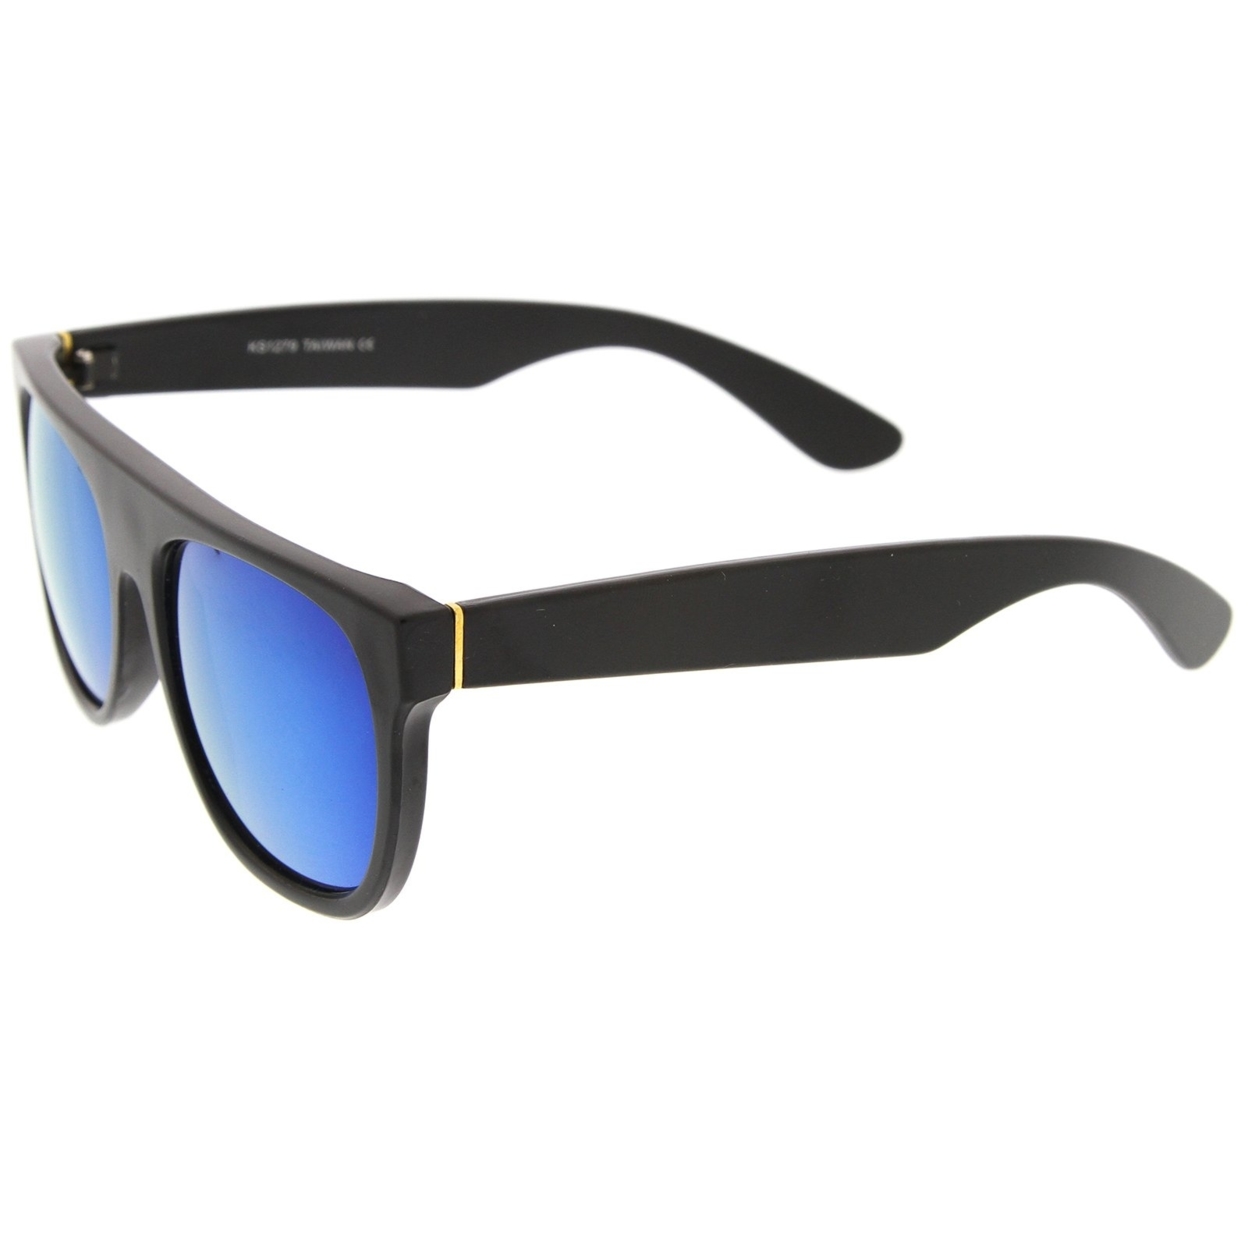 Modern Super Flat-Top Wide Temple Colored Mirror Lens Horn Rimmed Sunglasses 55mm - Shiny White / Yellow Mirror